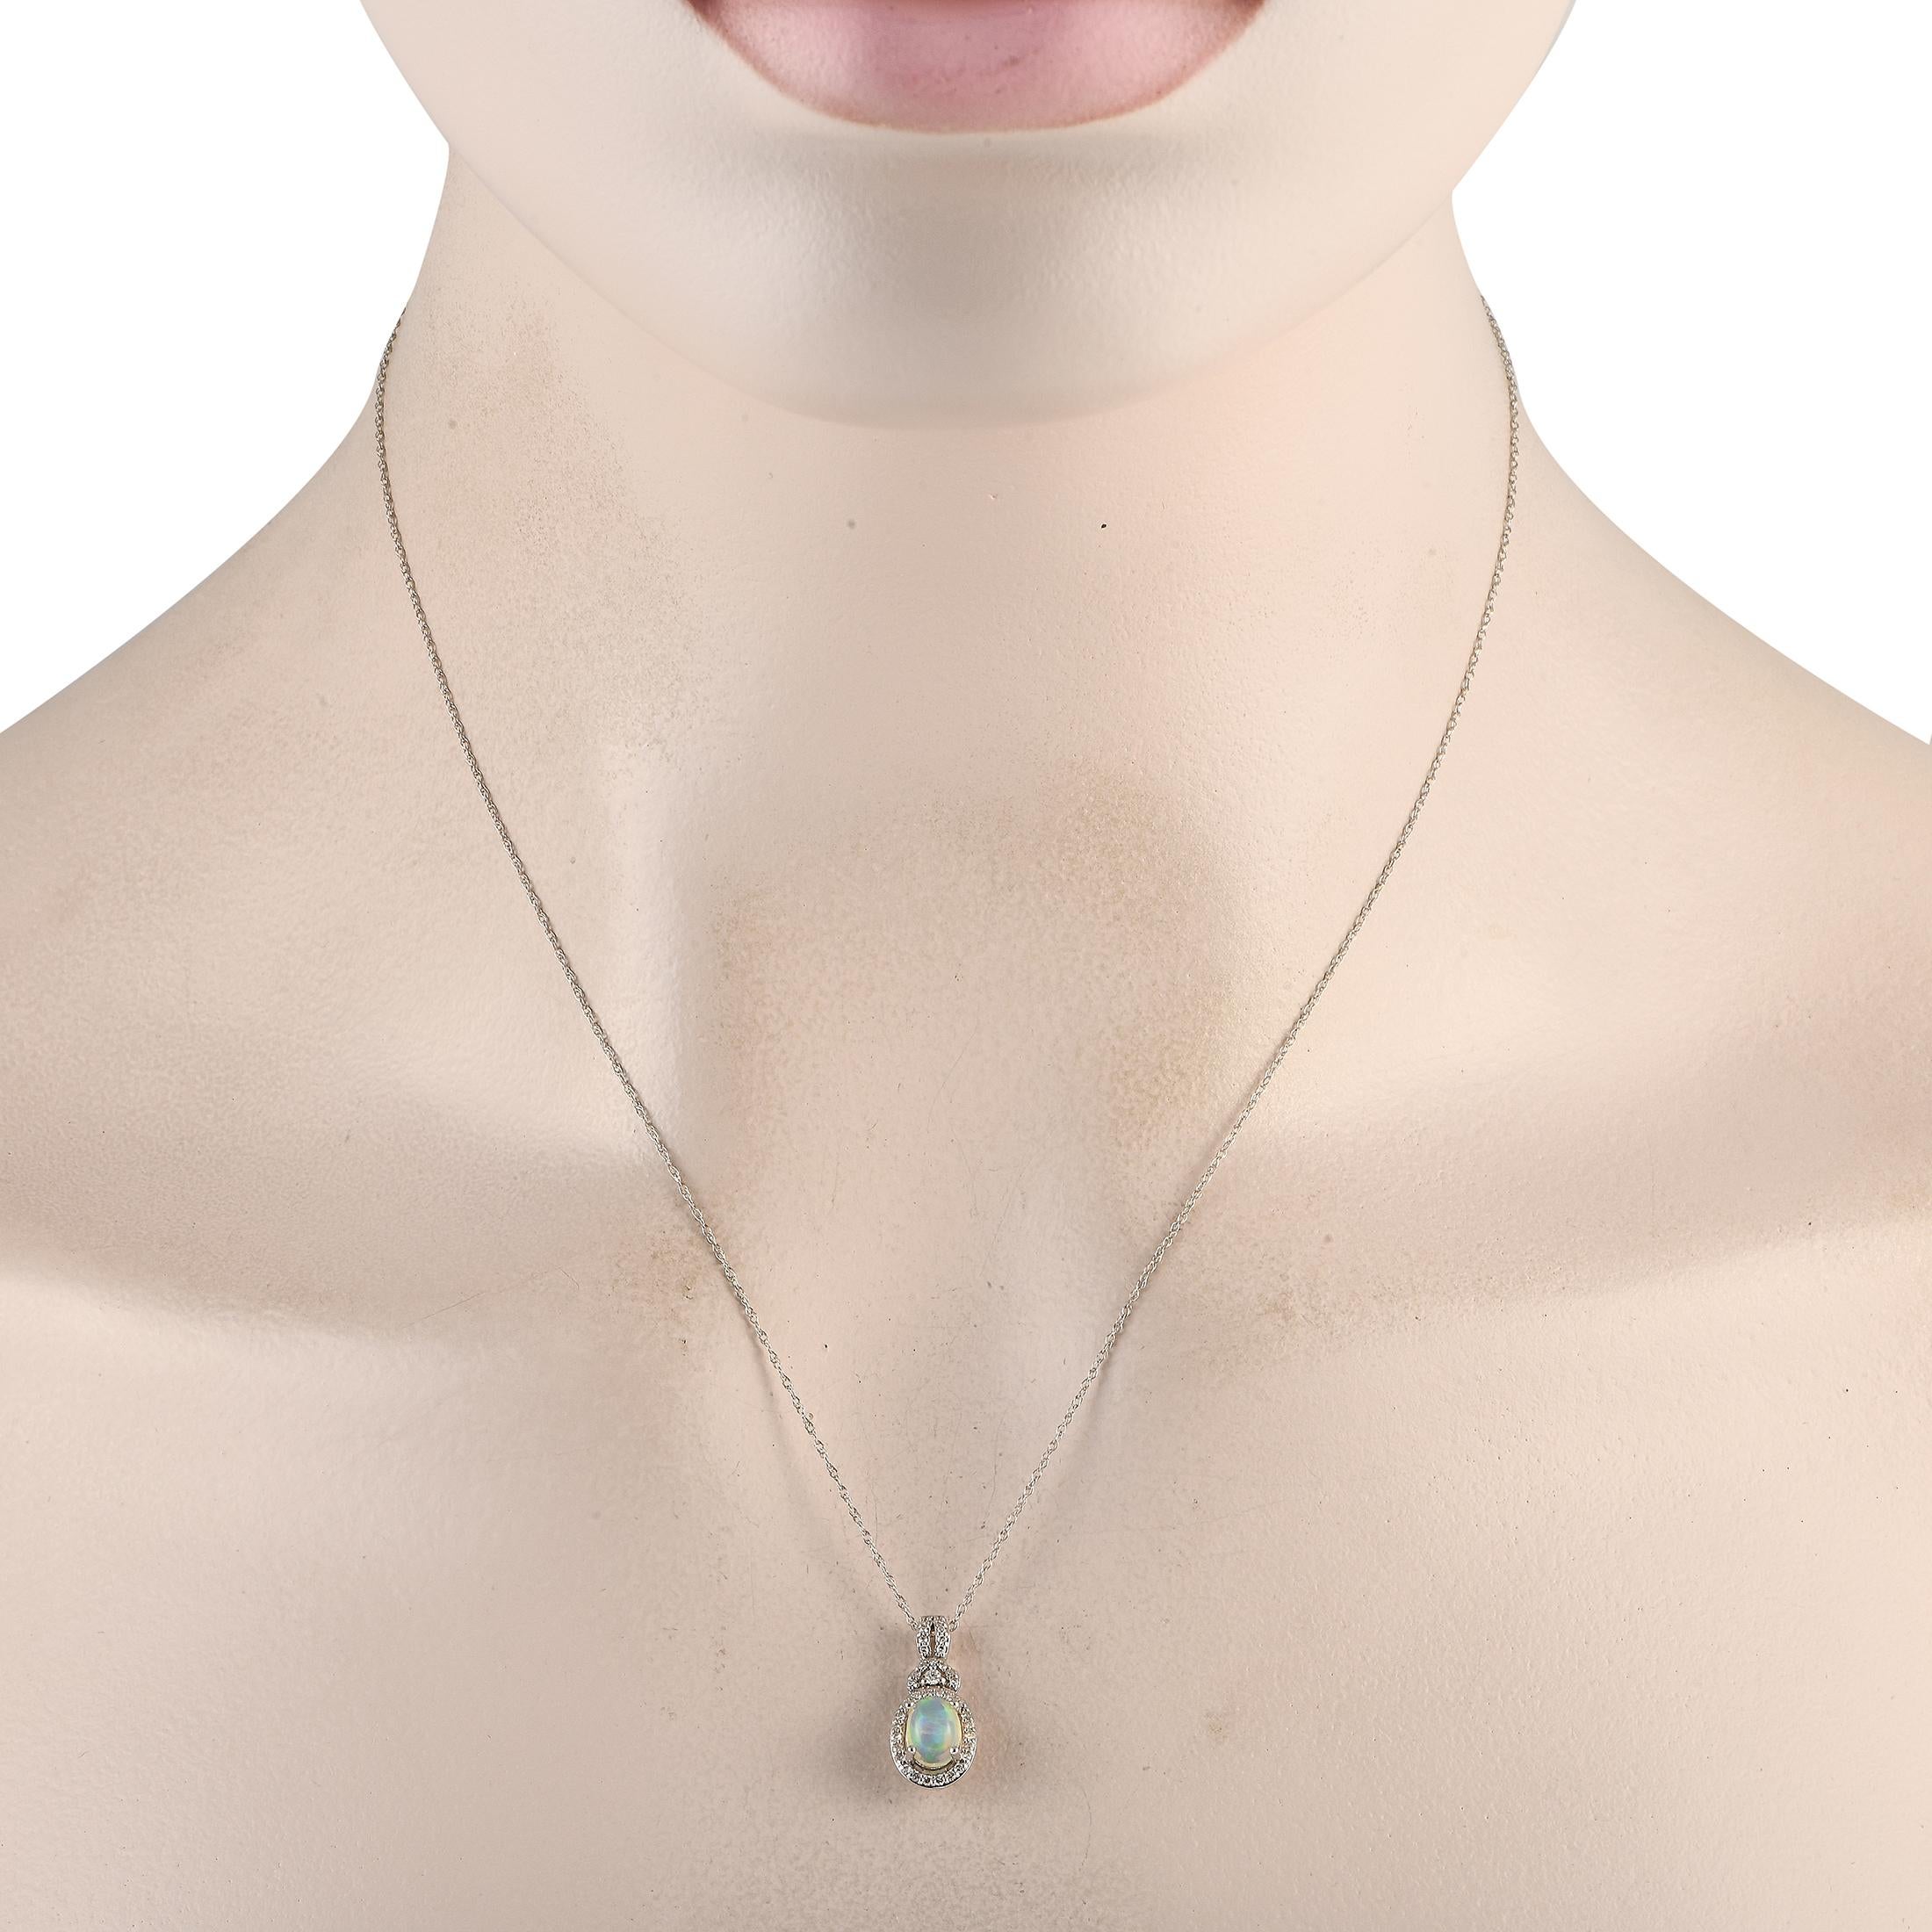 Highlight your necklace and bring a touch of glamour to your looks with this white gold necklace punctuated by a milky white opal. The necklace chain measures 18 inches long. It holds a diamond-traced pendant with an oval-shaped opal gemstone framed